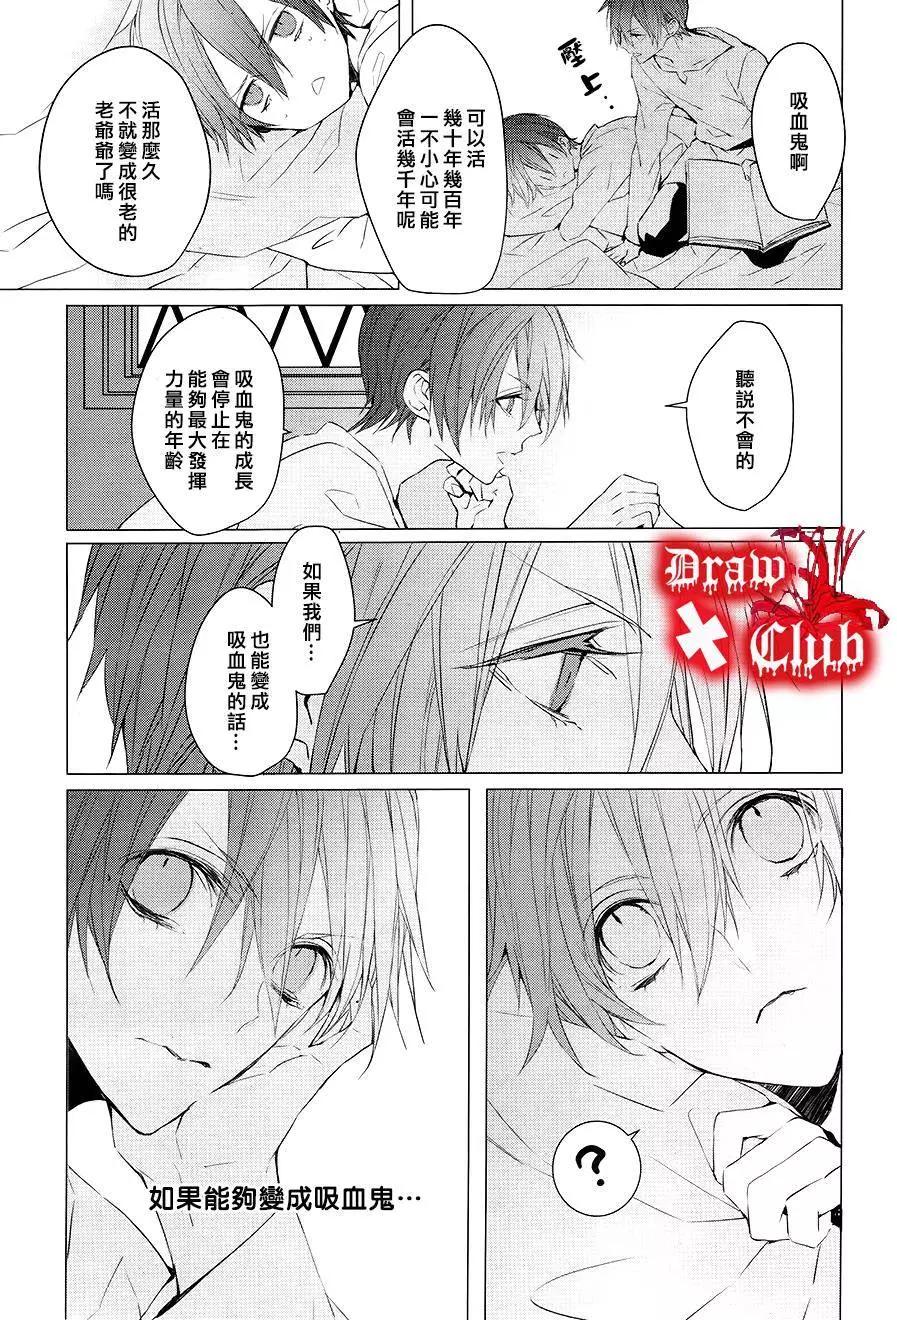 Bloody Mary - 第29回 - 6